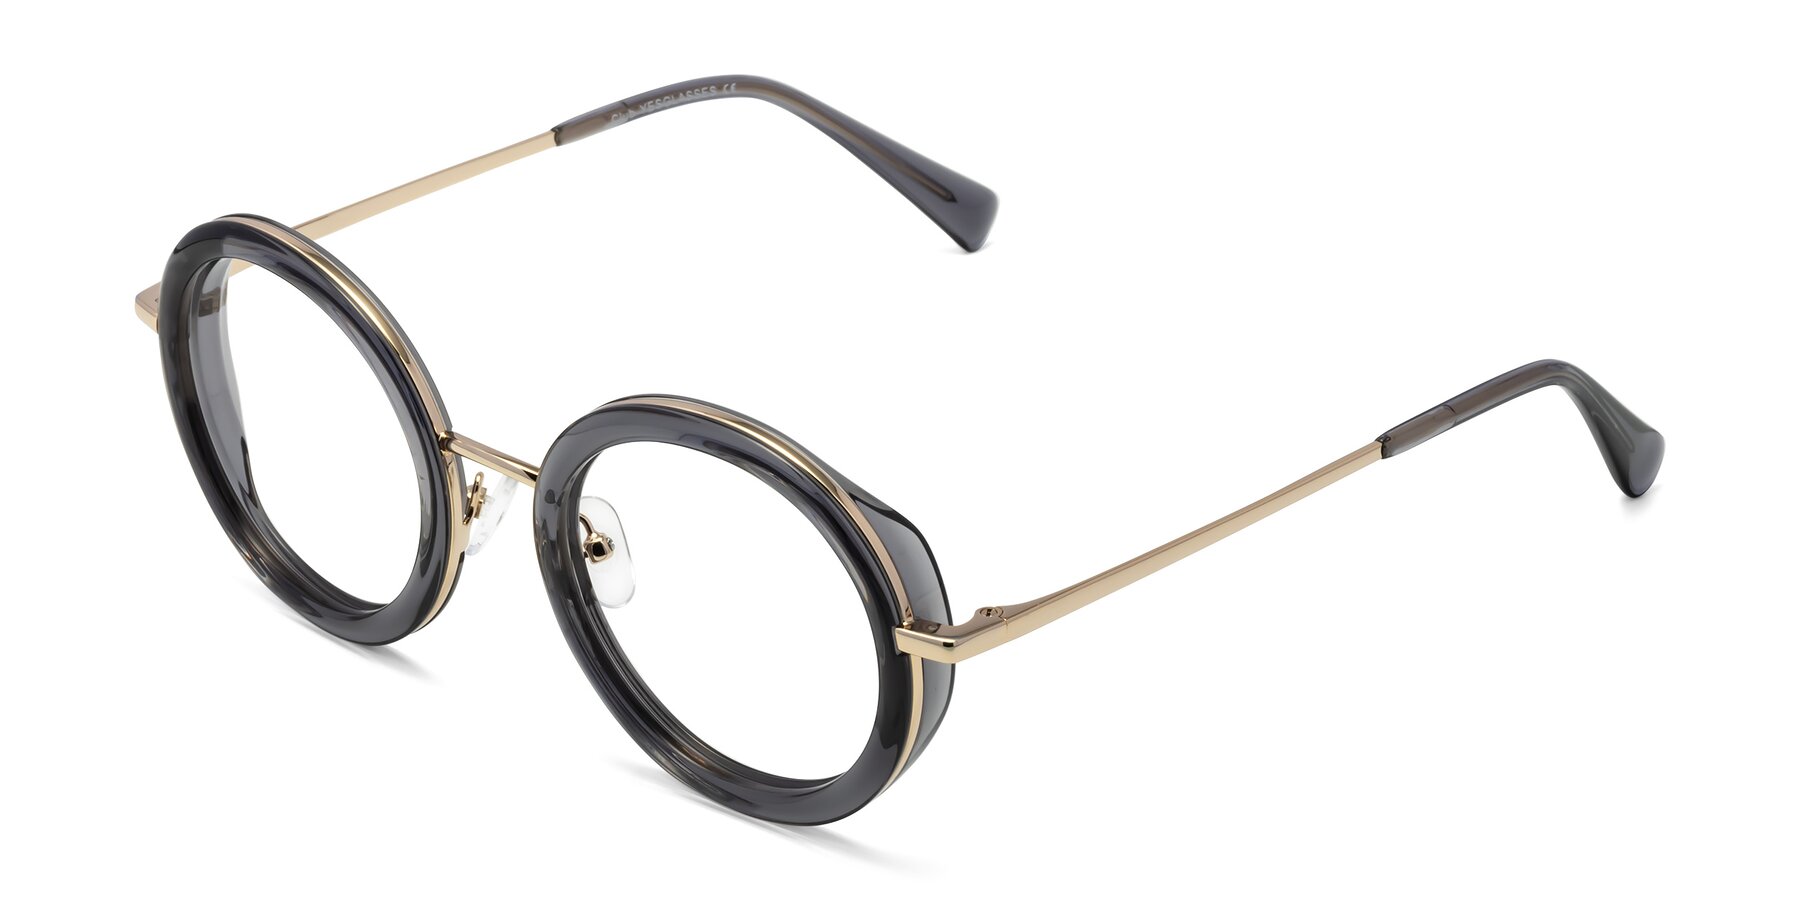 Angle of Club in Gray-Gold with Clear Reading Eyeglass Lenses